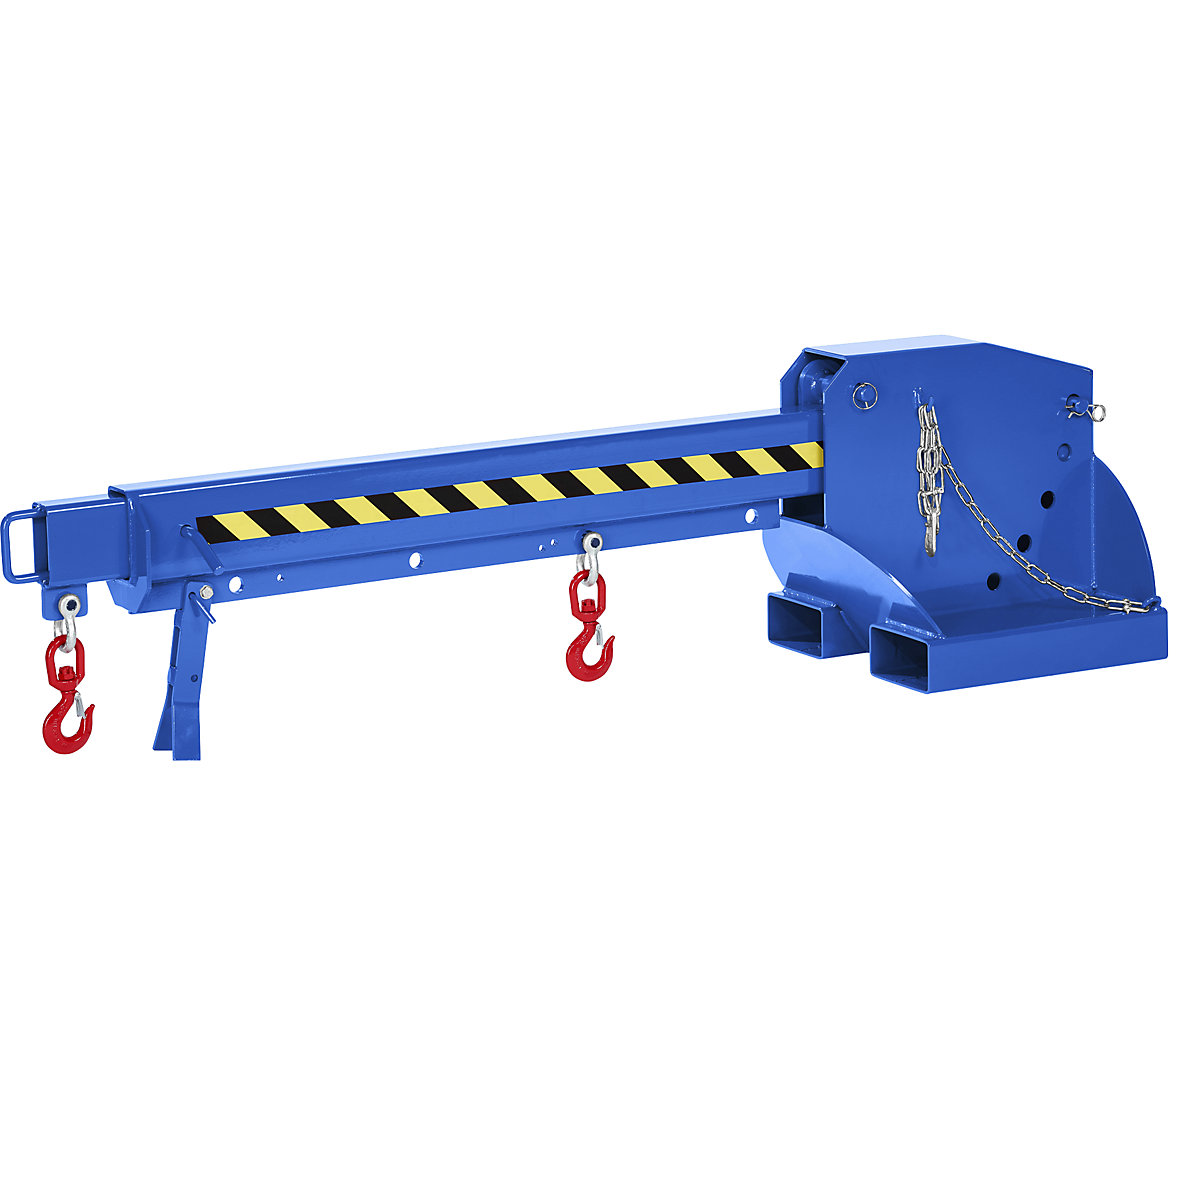 Telescopic loader – eurokraft pro, height adjustable in 5 stages, max. load 650 – 3000 kg, telescopic, painted blue